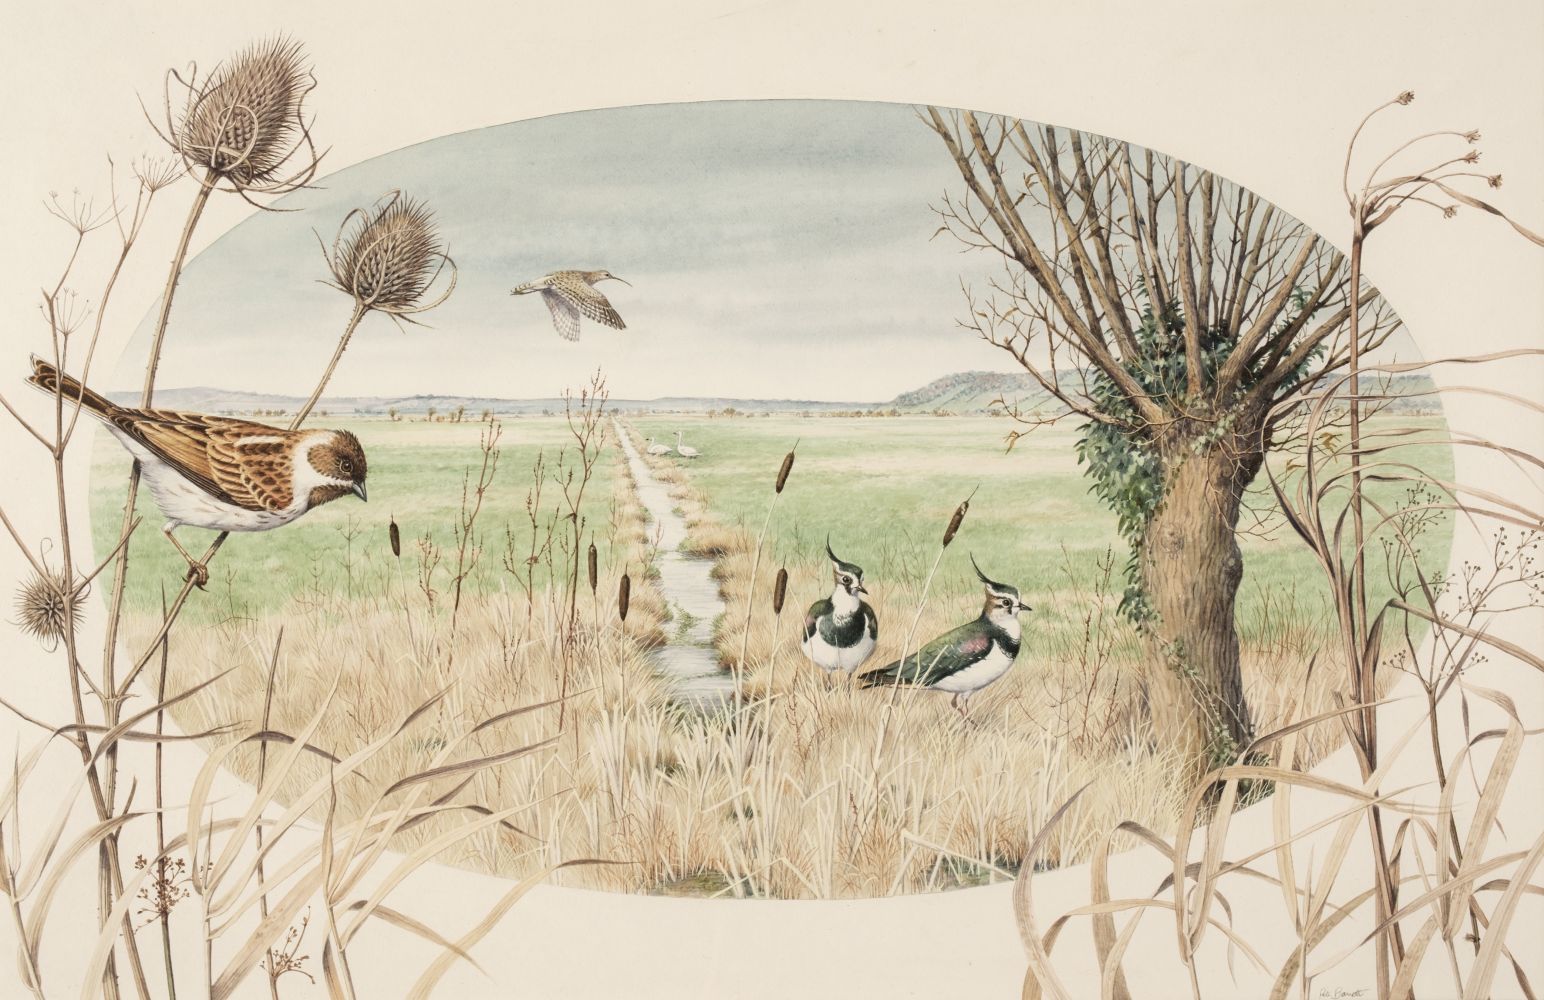 Barrett (Peter, 1935). Countrylandscape, watercolour, pen and ink